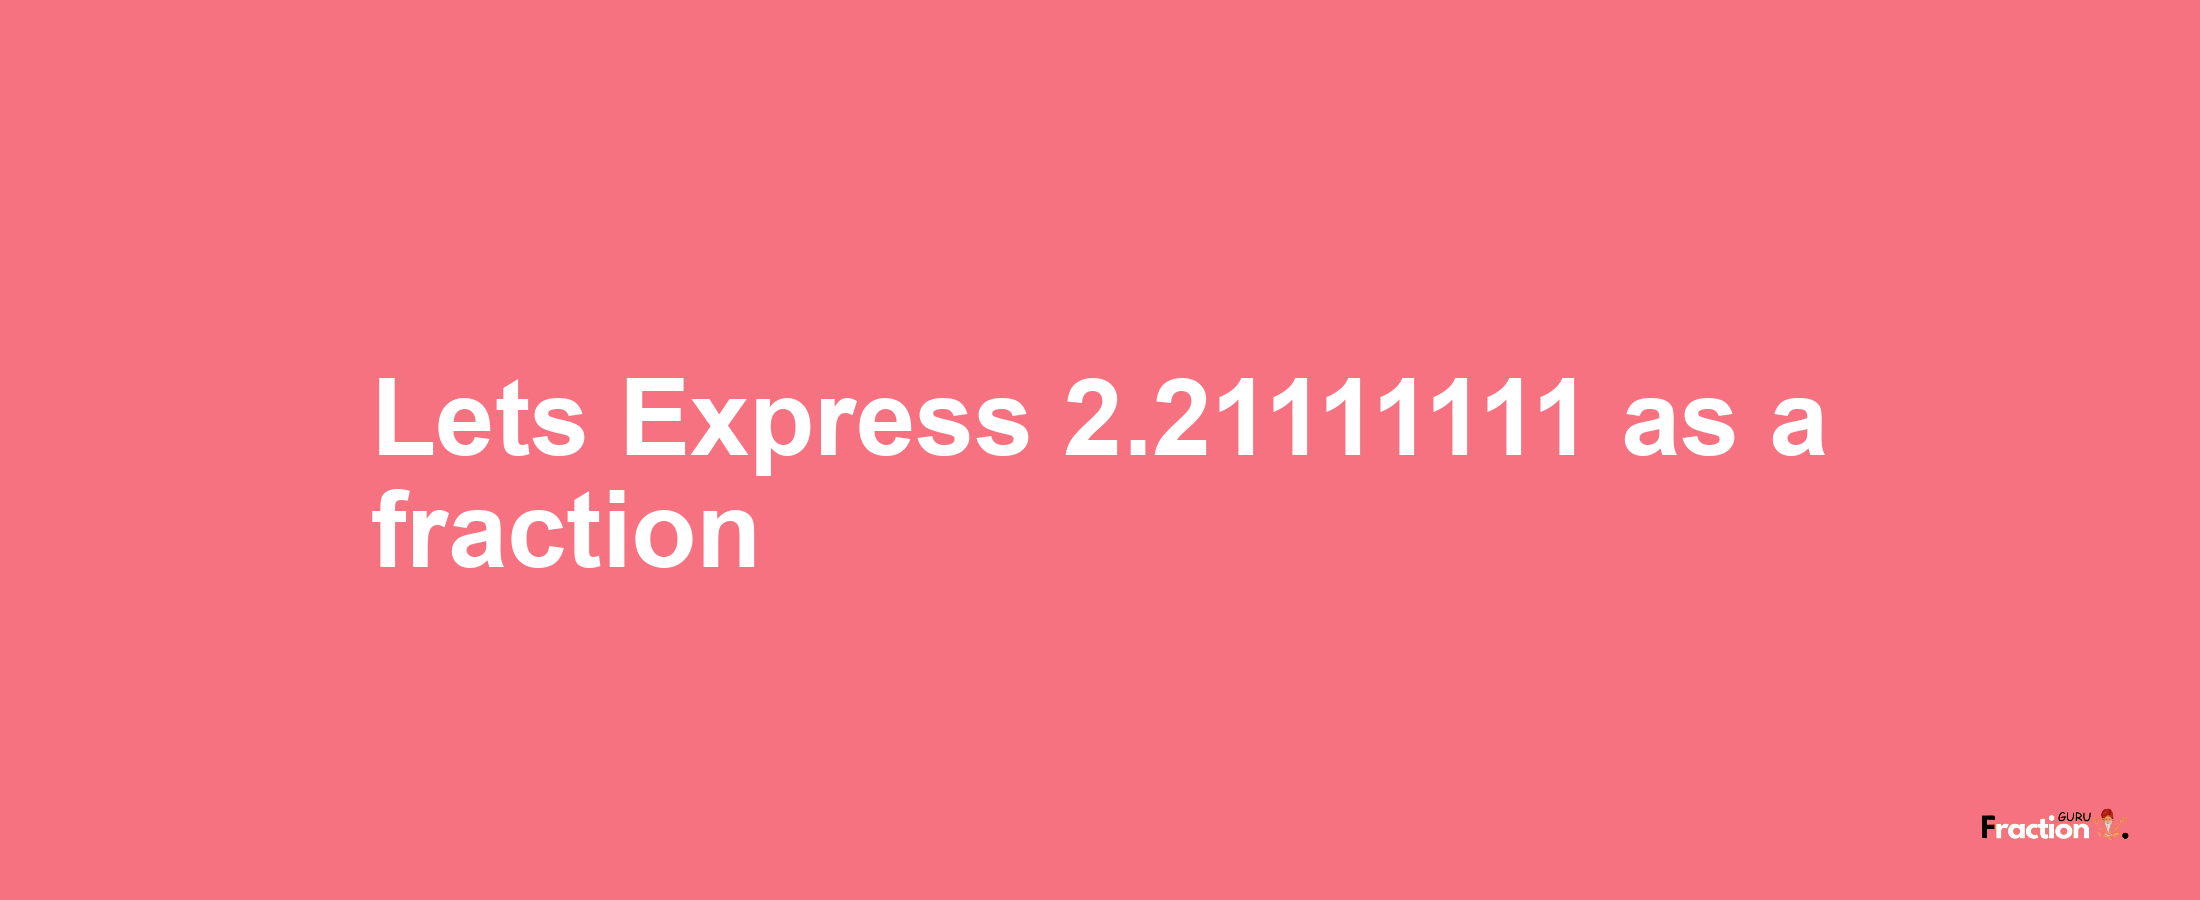 Lets Express 2.21111111 as afraction